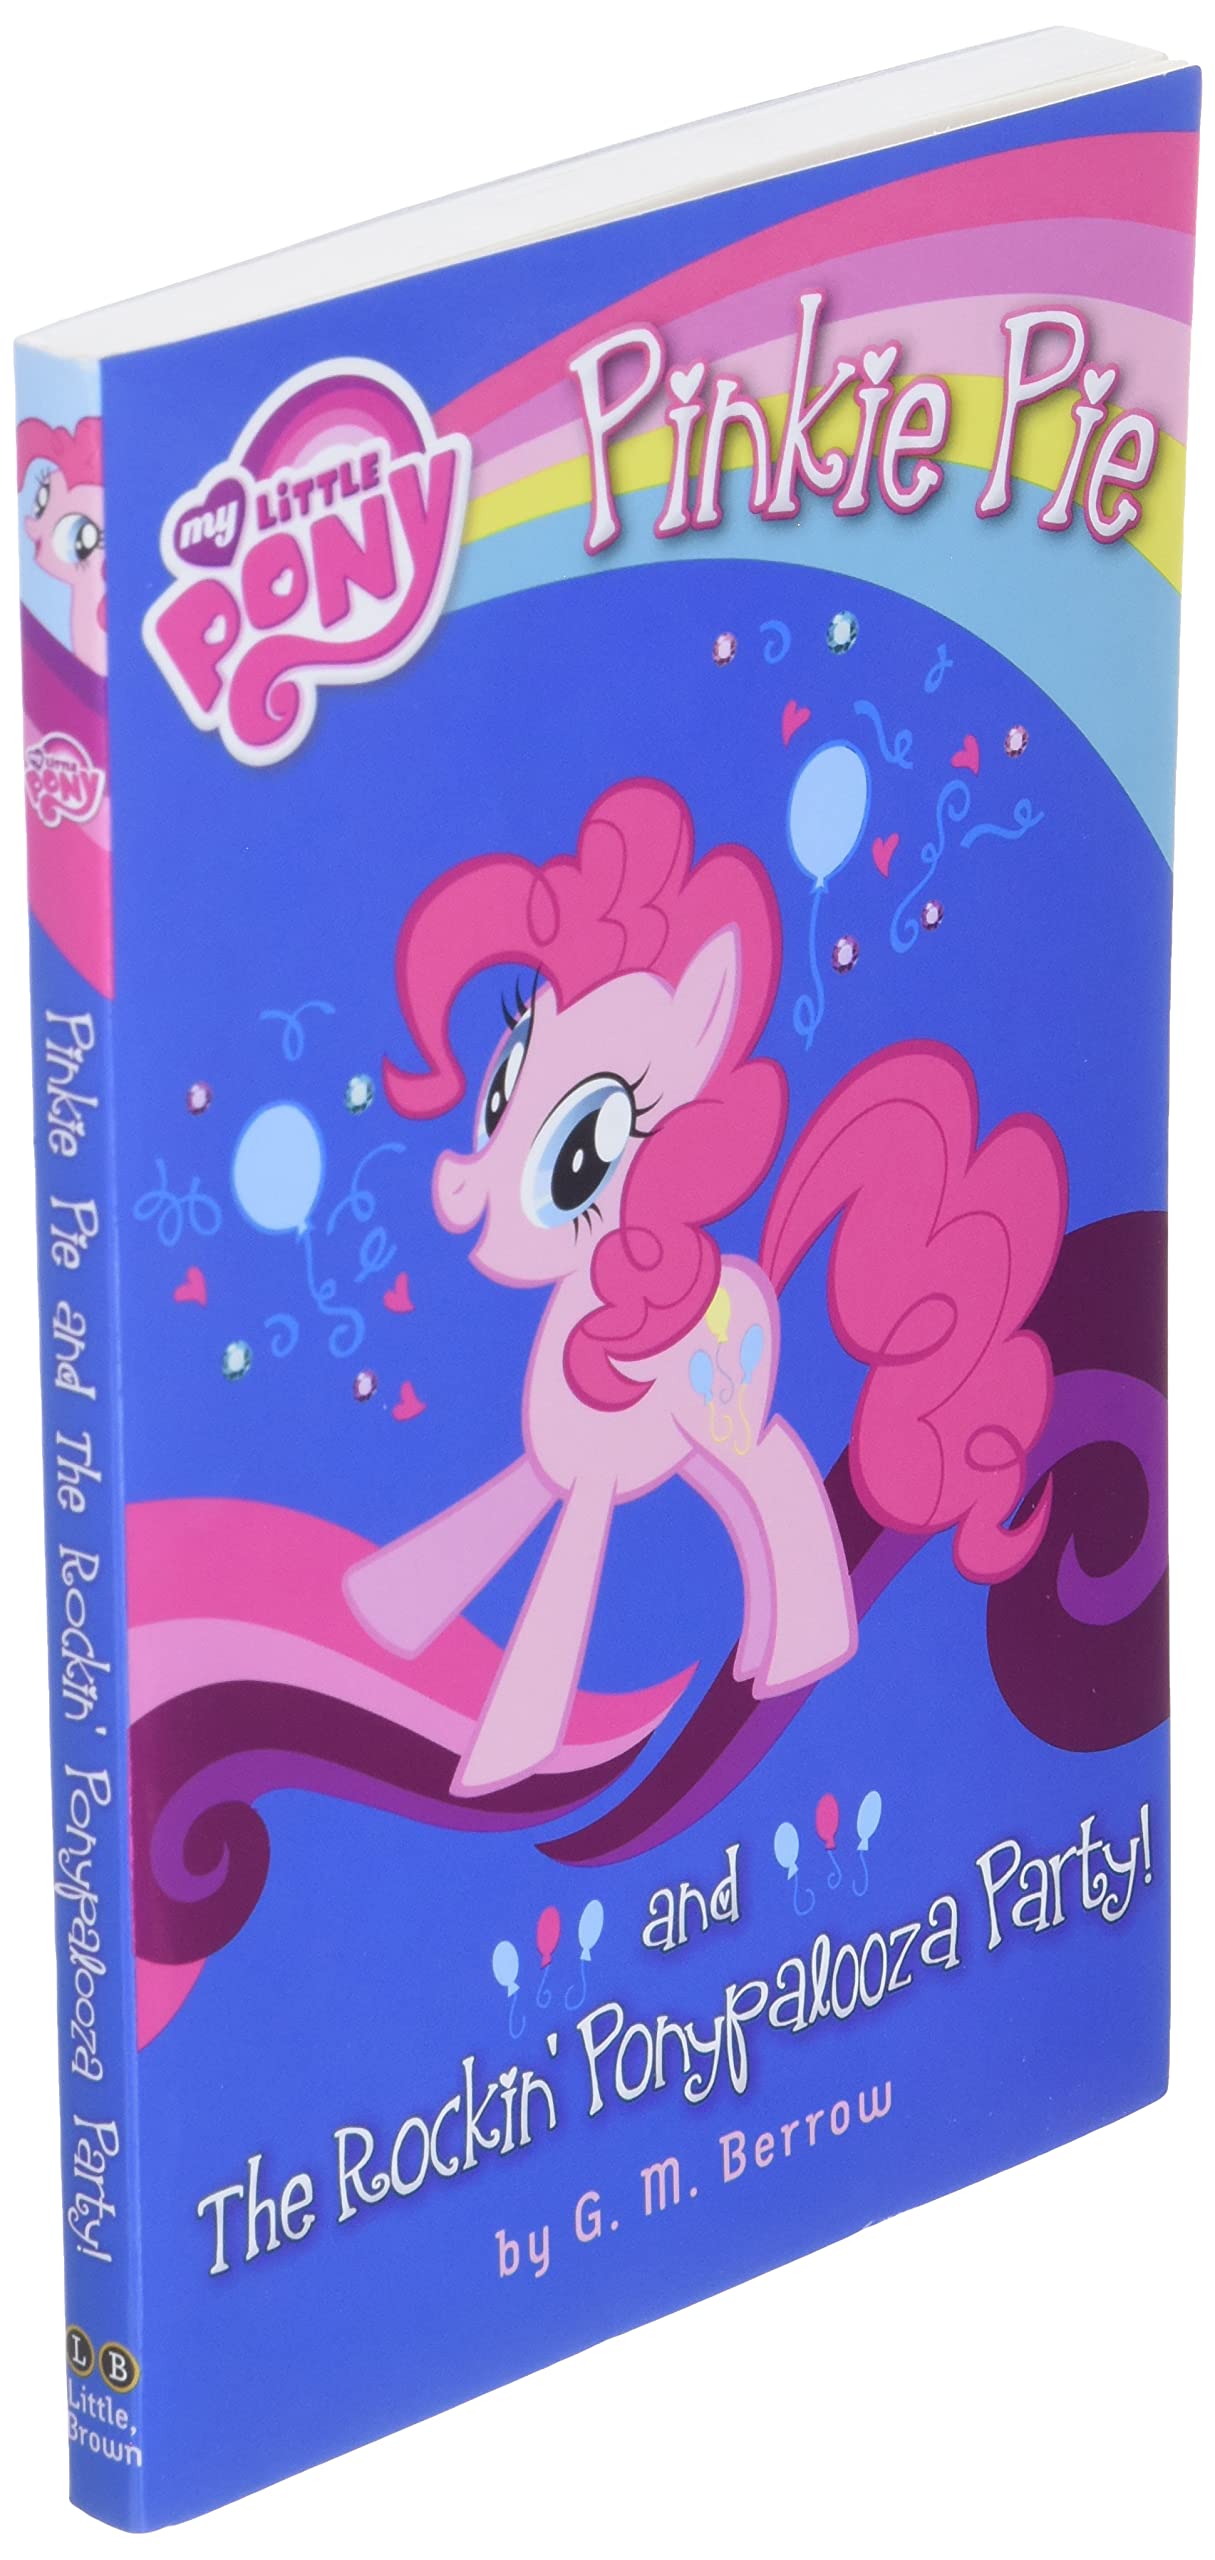 MLP Pinkie Pie and the Rockin' Ponypalooza Party! Book 3